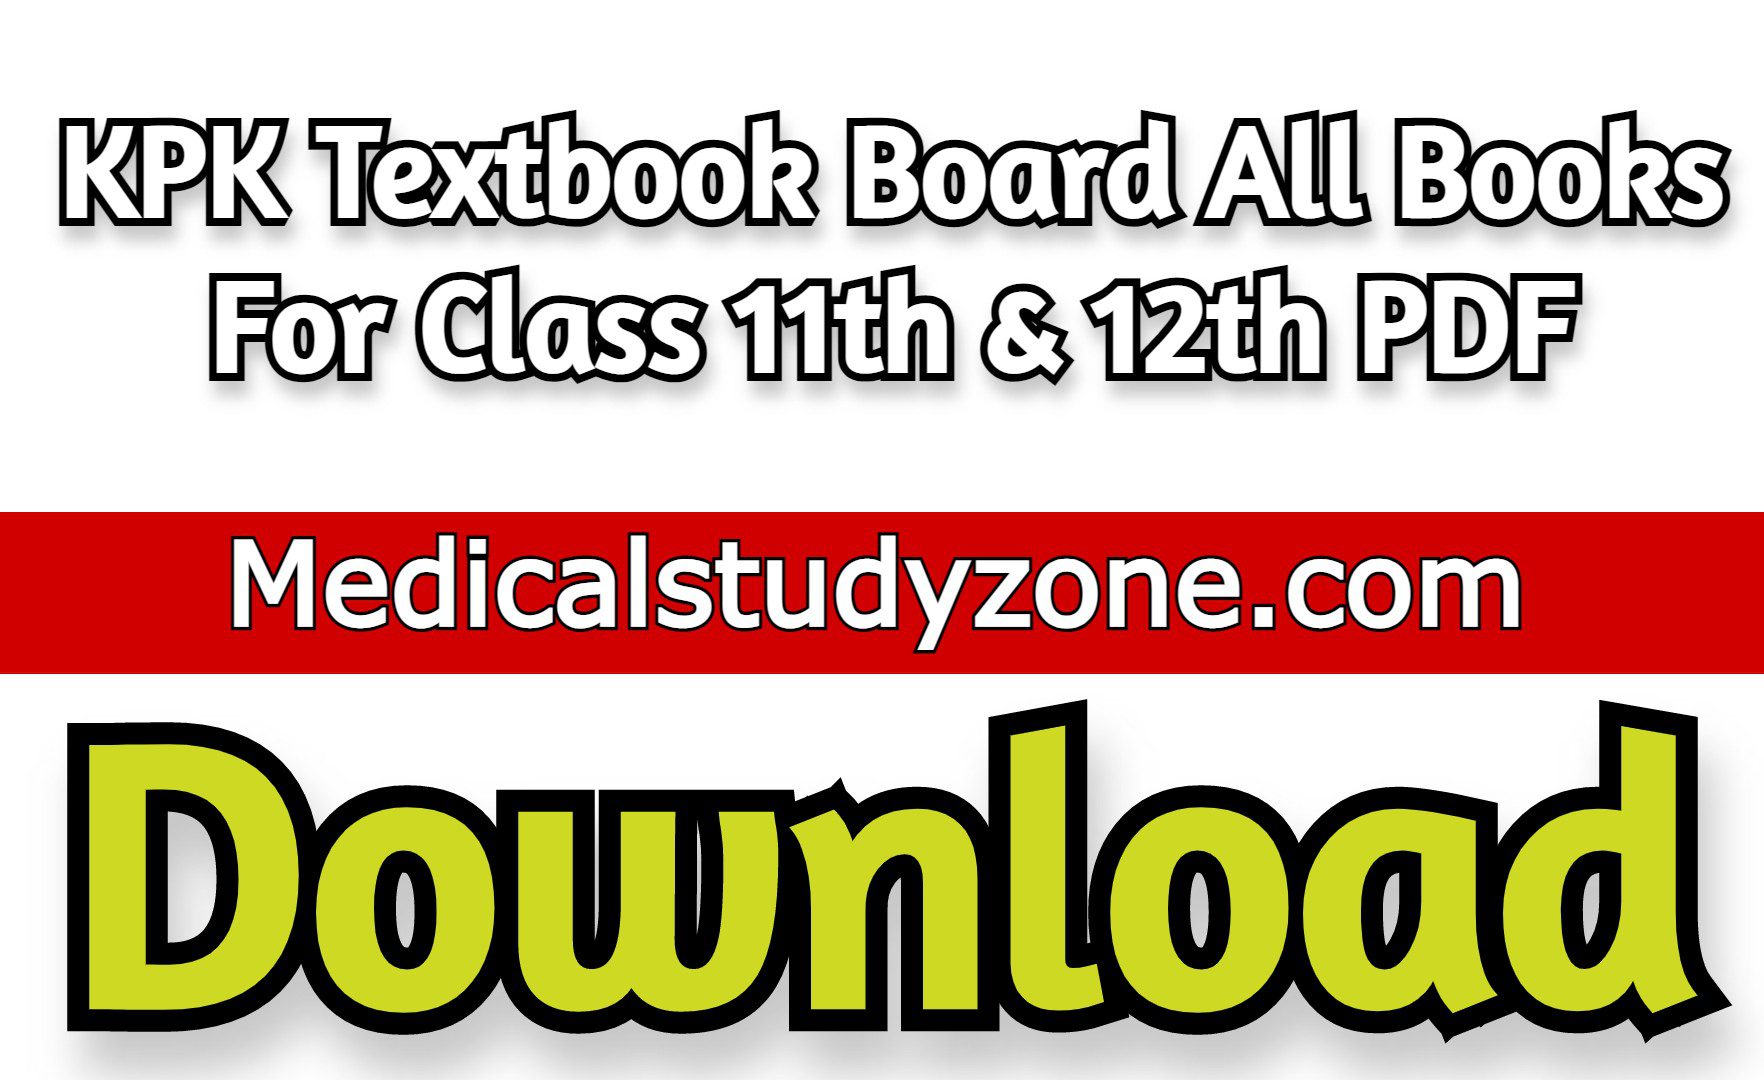 KPK Textbook Board All Books For Class 11th & 12th PDF 2021 Download